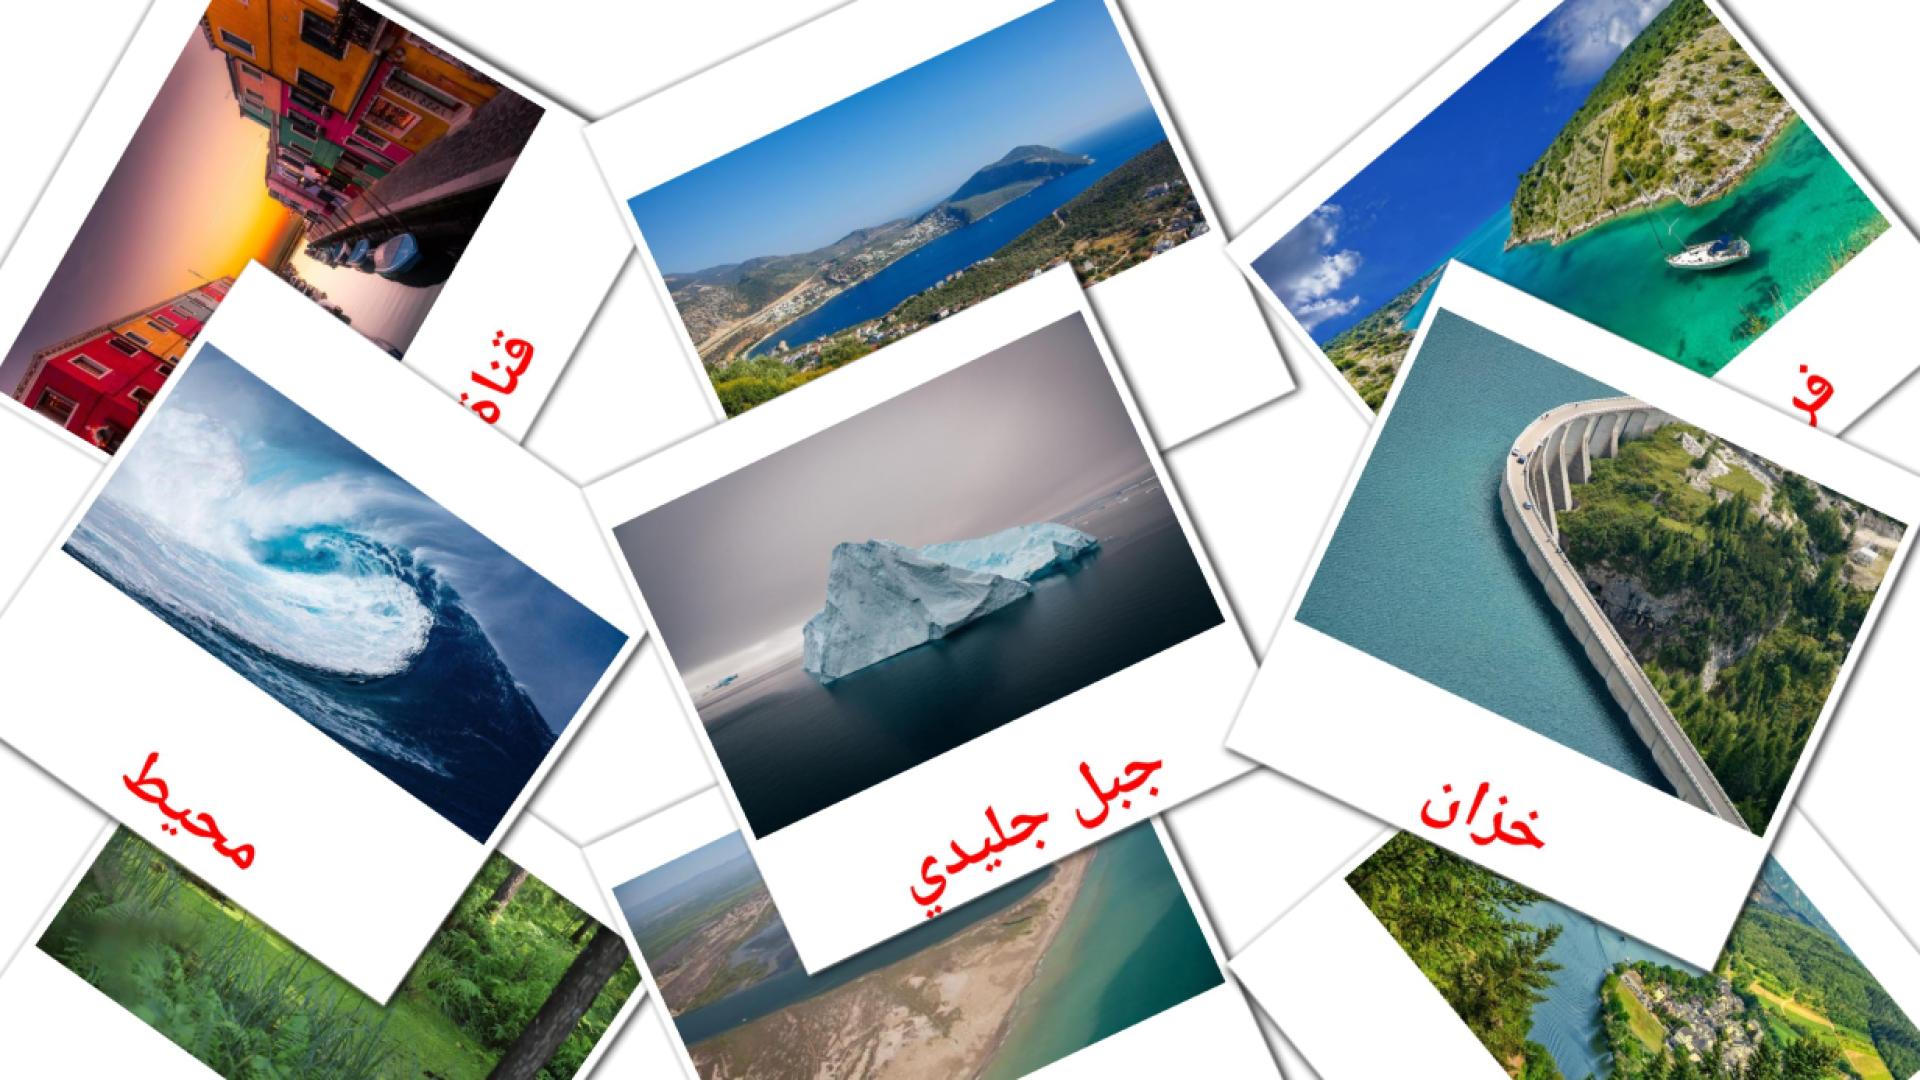 Bodies of Water - arabic vocabulary cards